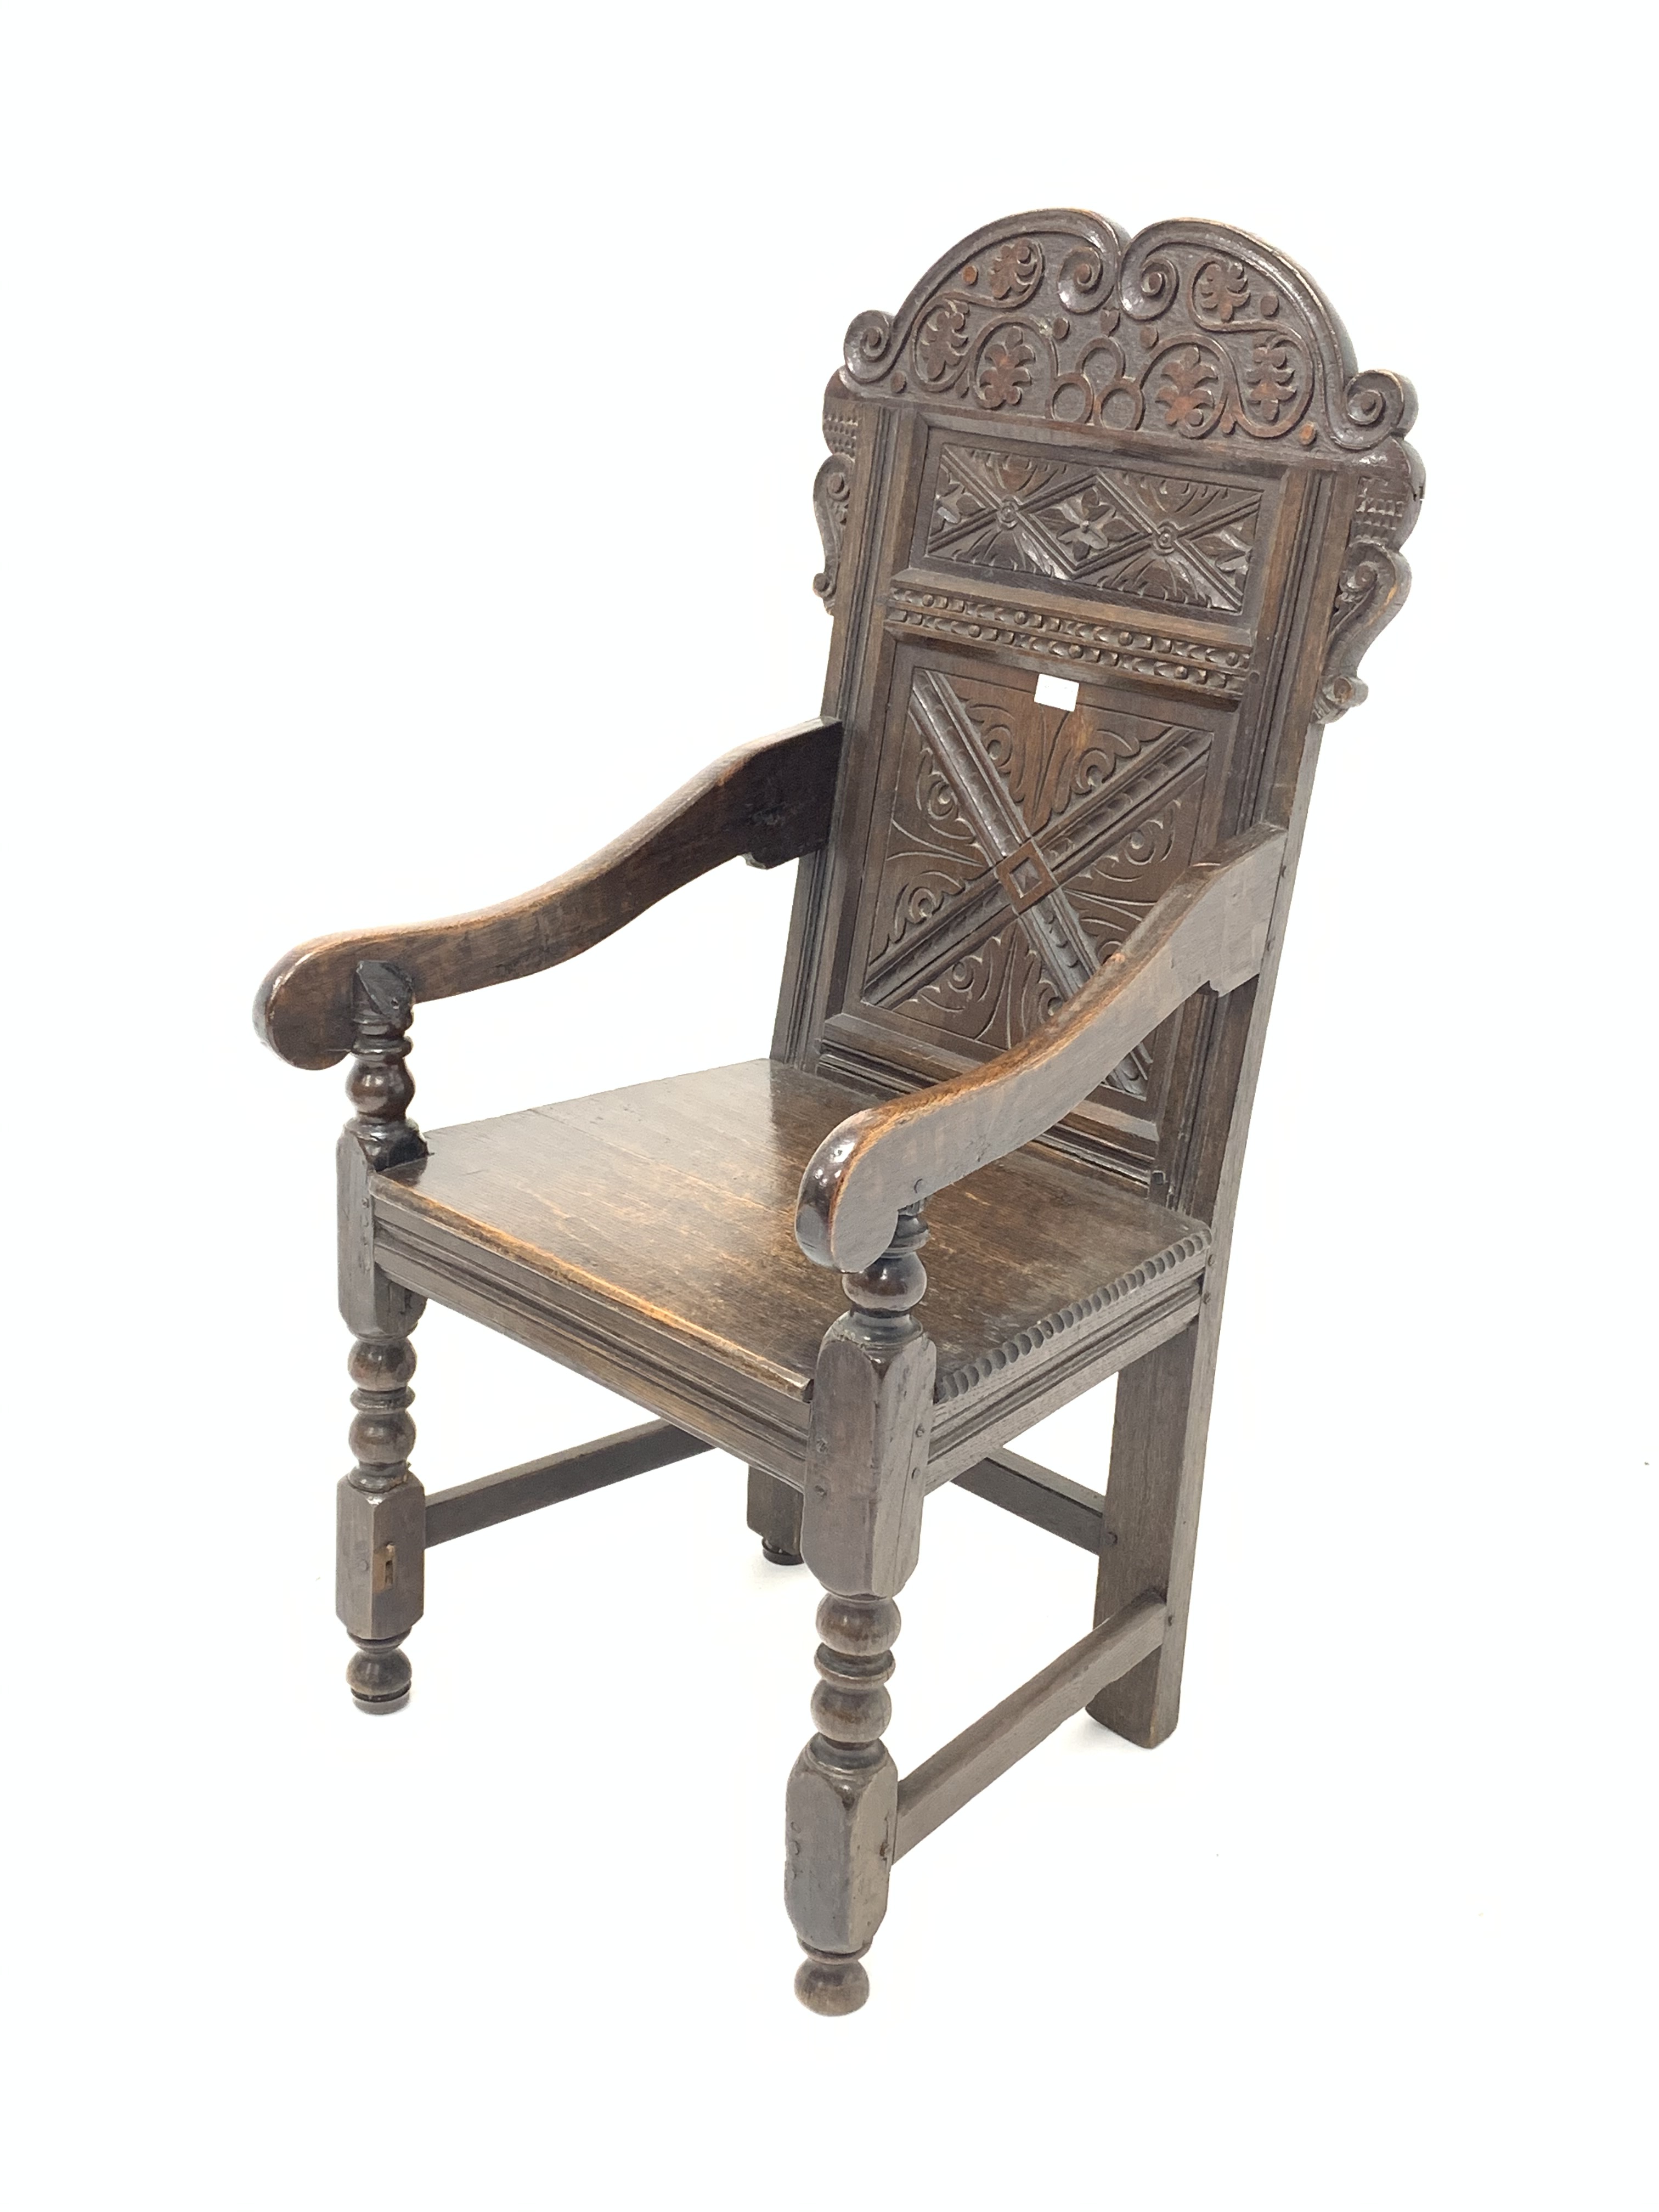 18th century and later oak Wainscote chair, scroll carved back panel,